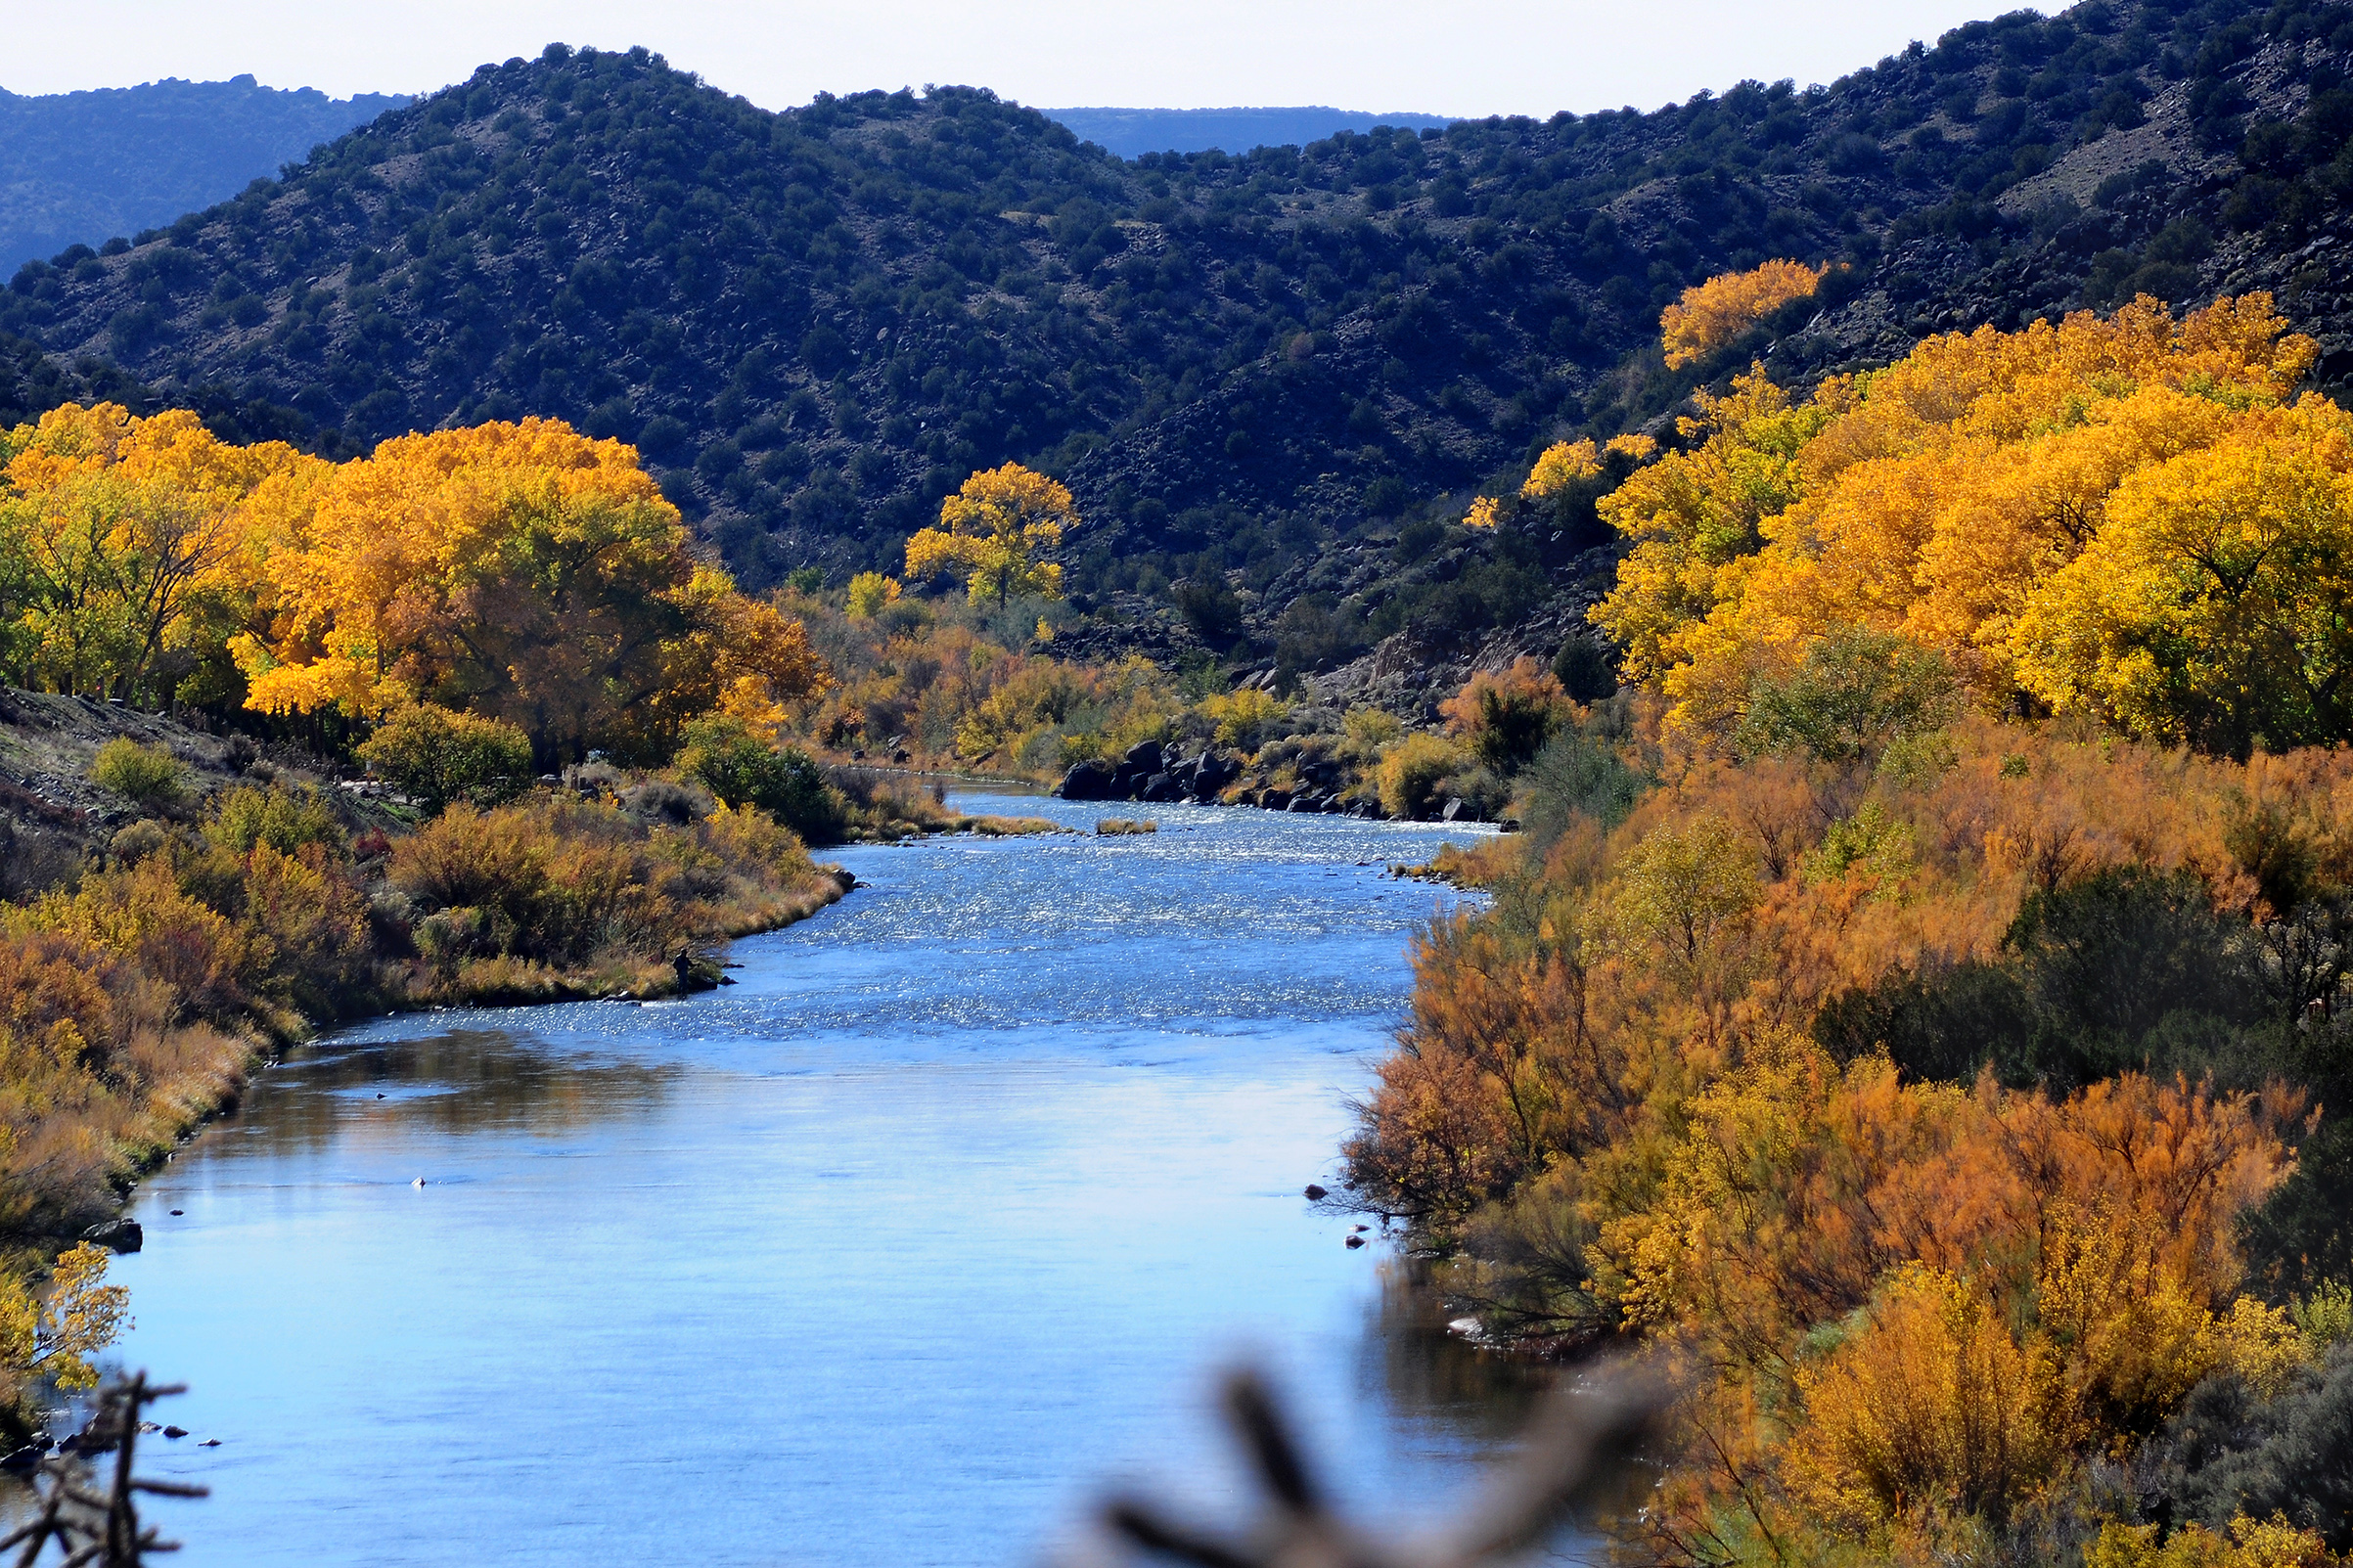 The Rio Grande River flows past cottonwood trees near Taos, New Mexico. (Robert Alexander—Getty Images)